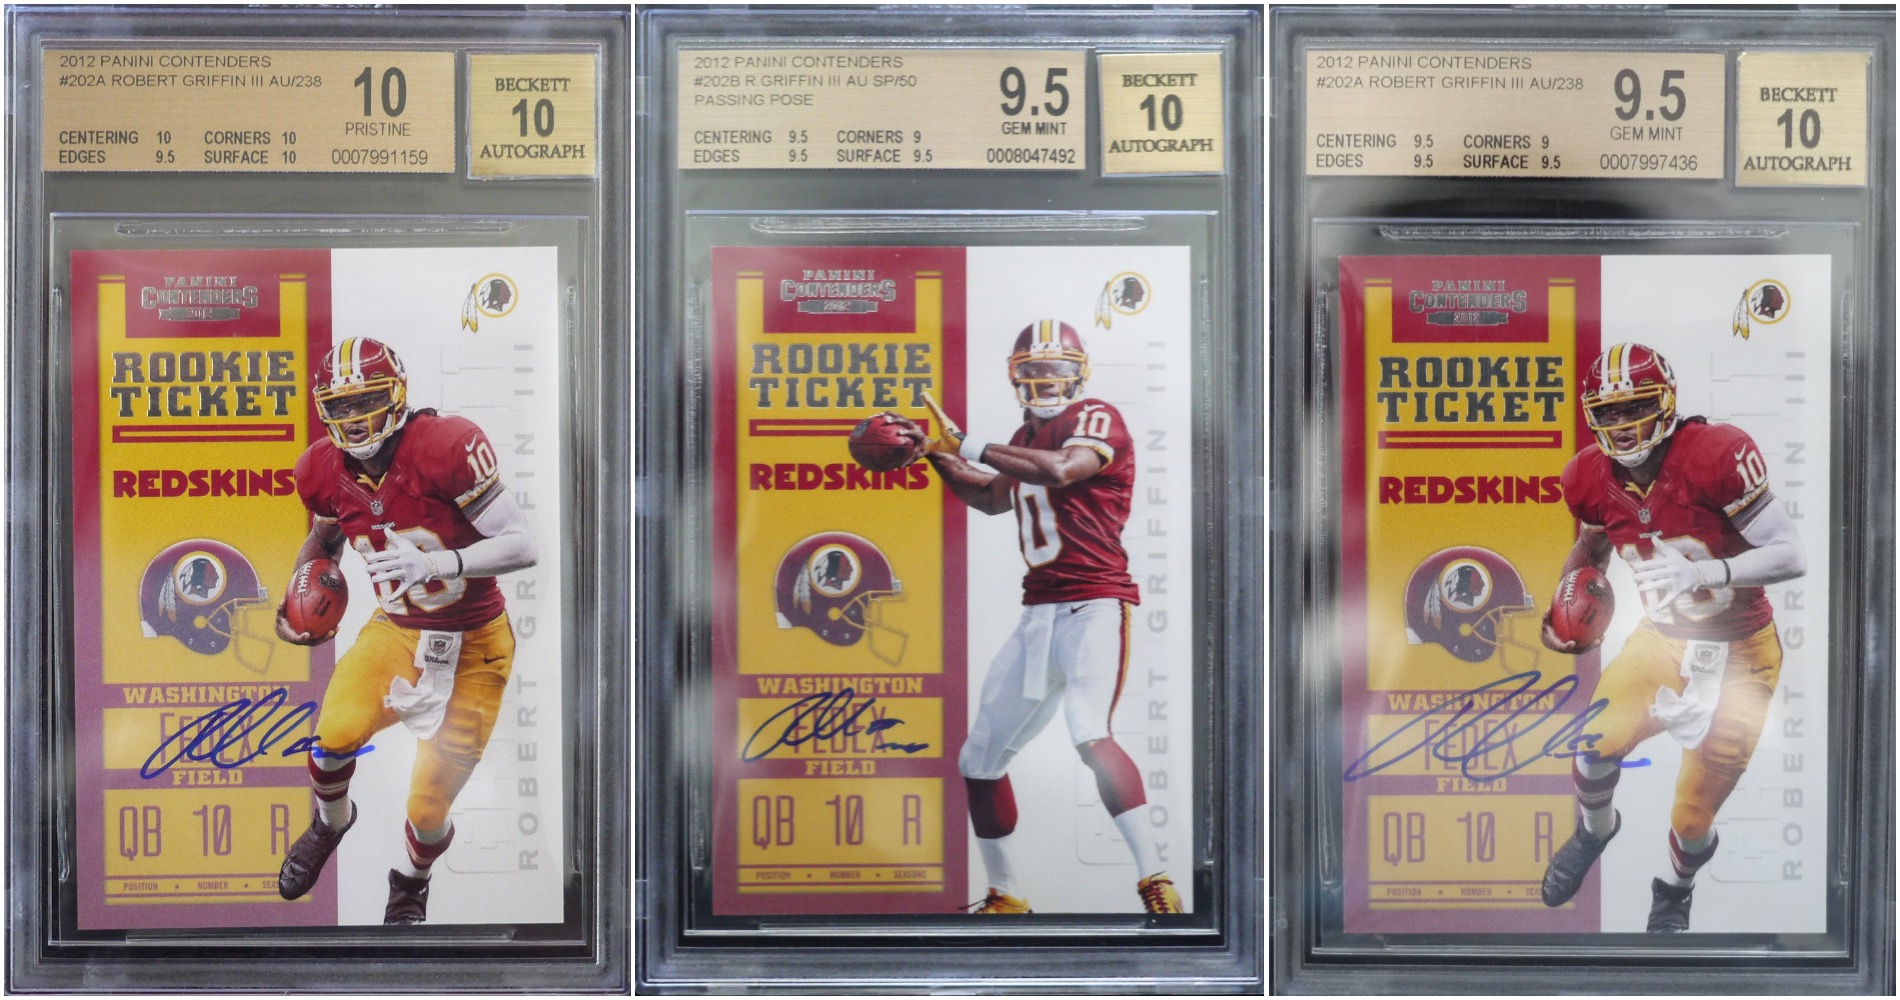 Three images of Robert Griffin III sports trading cards